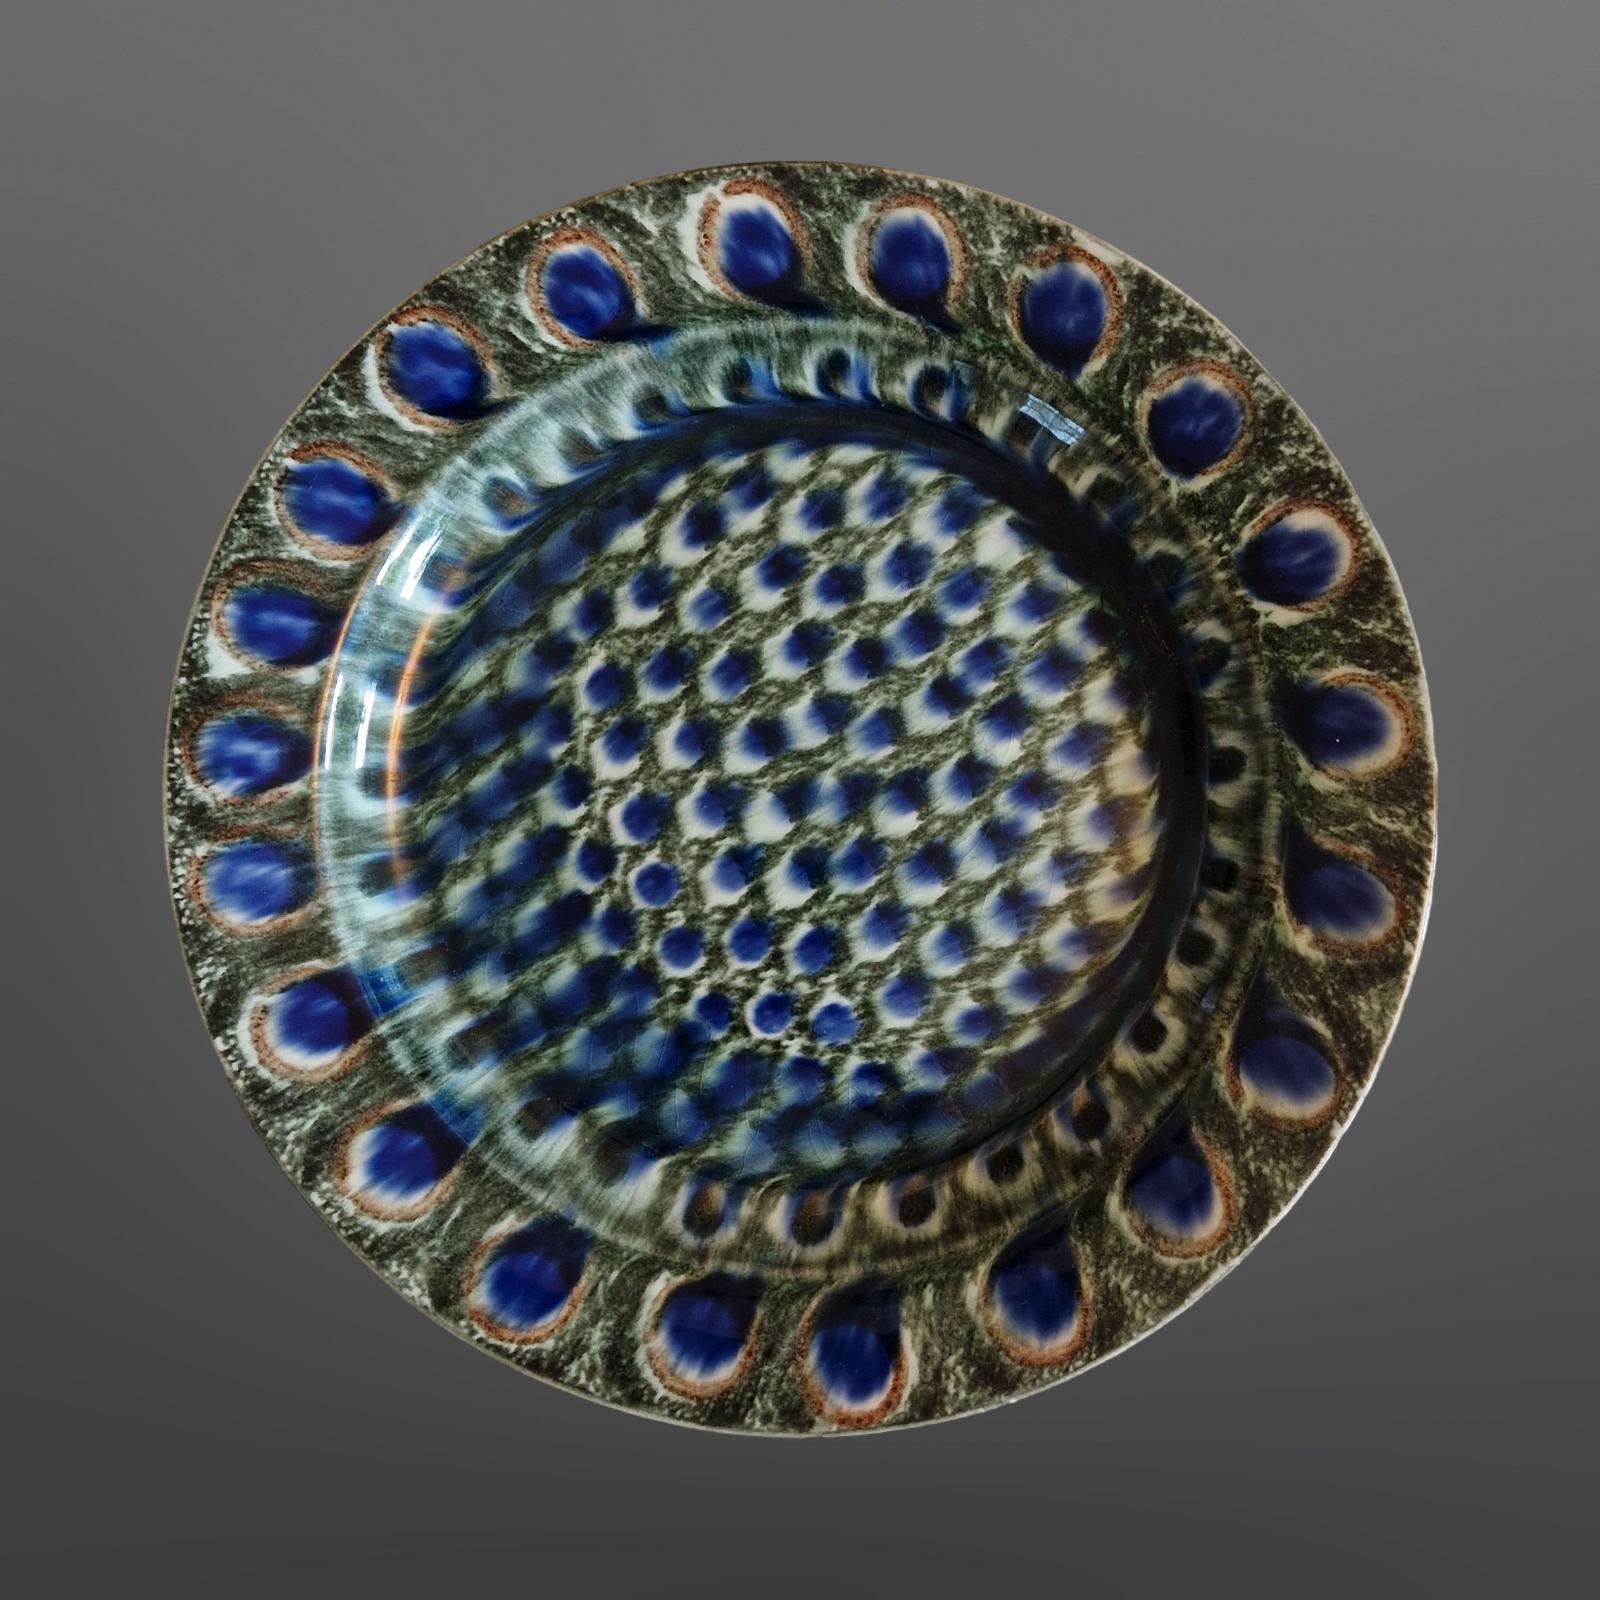 Very rare decorative plate. Made by Freidrich Festeresen between 1909 and 1916. It has a peacock pattern which appears to have flowed out to much on one side. This outflow gives it an almost psychedelic appearance. Beside the works by Festersen are